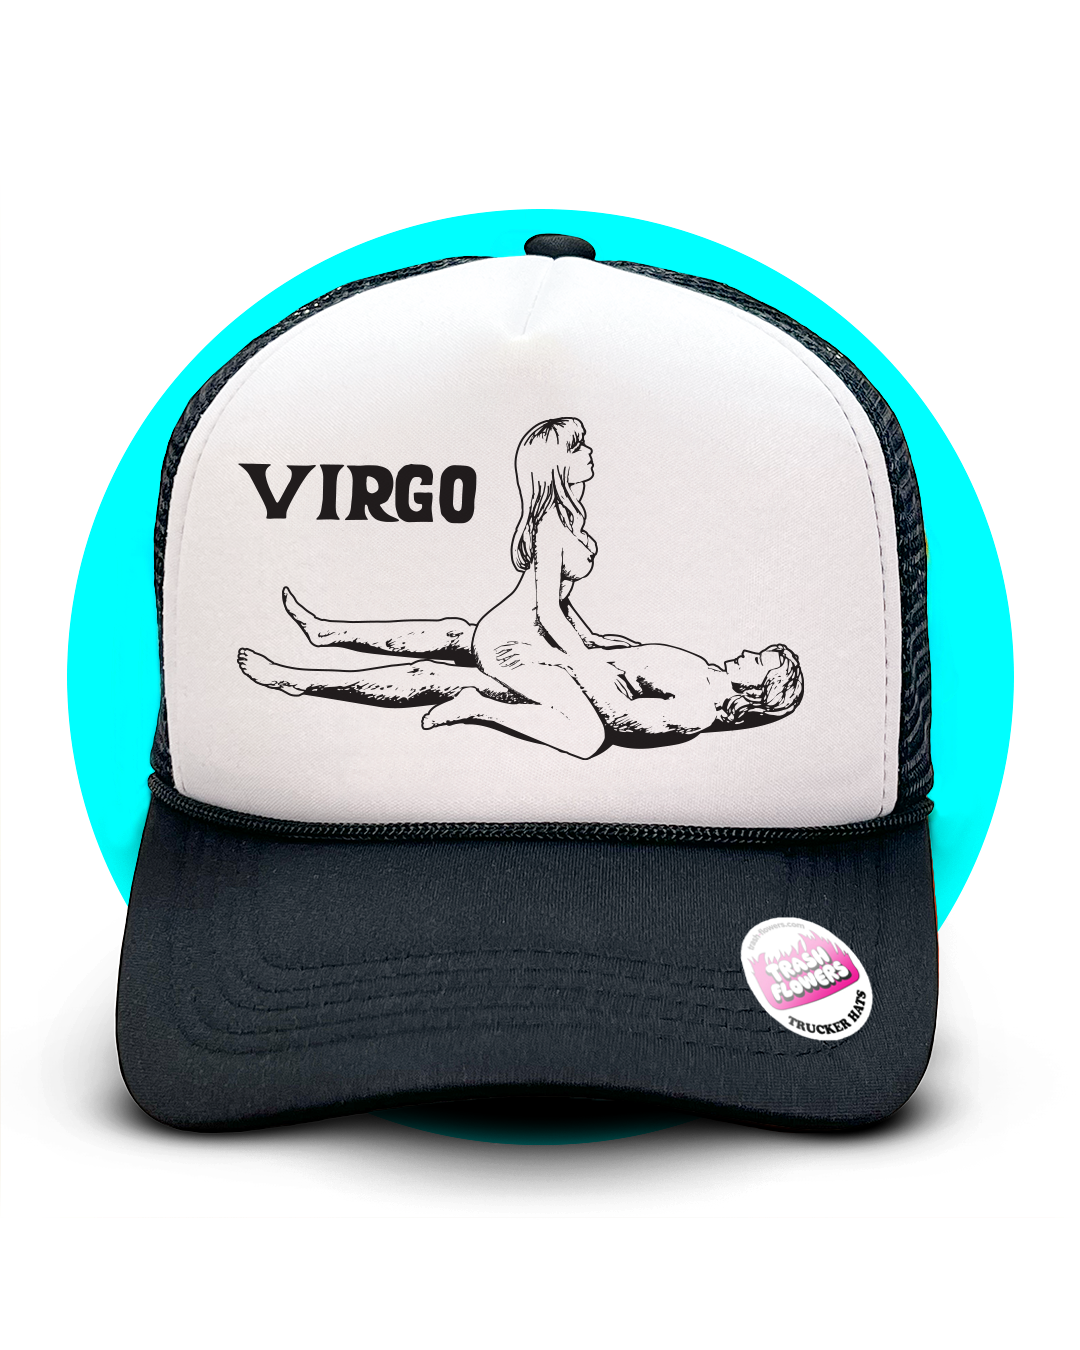 What's Your Sign? Zodiac Trucker Hat